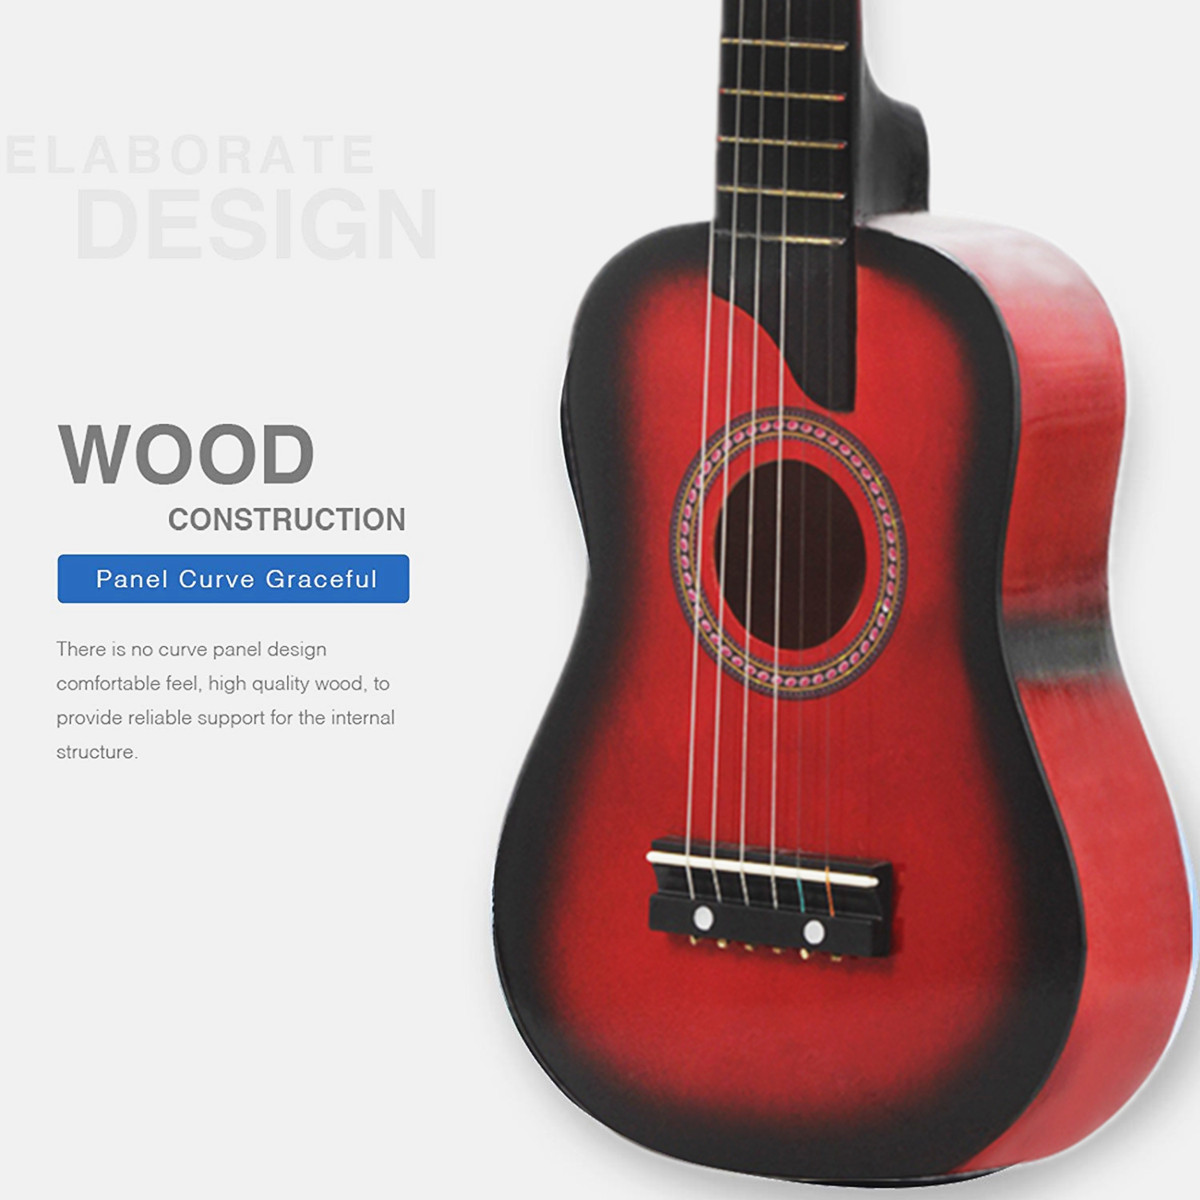 IRIN 25 Inch Basswood Guitar with String/Pick/Bag for Children Music Lovers